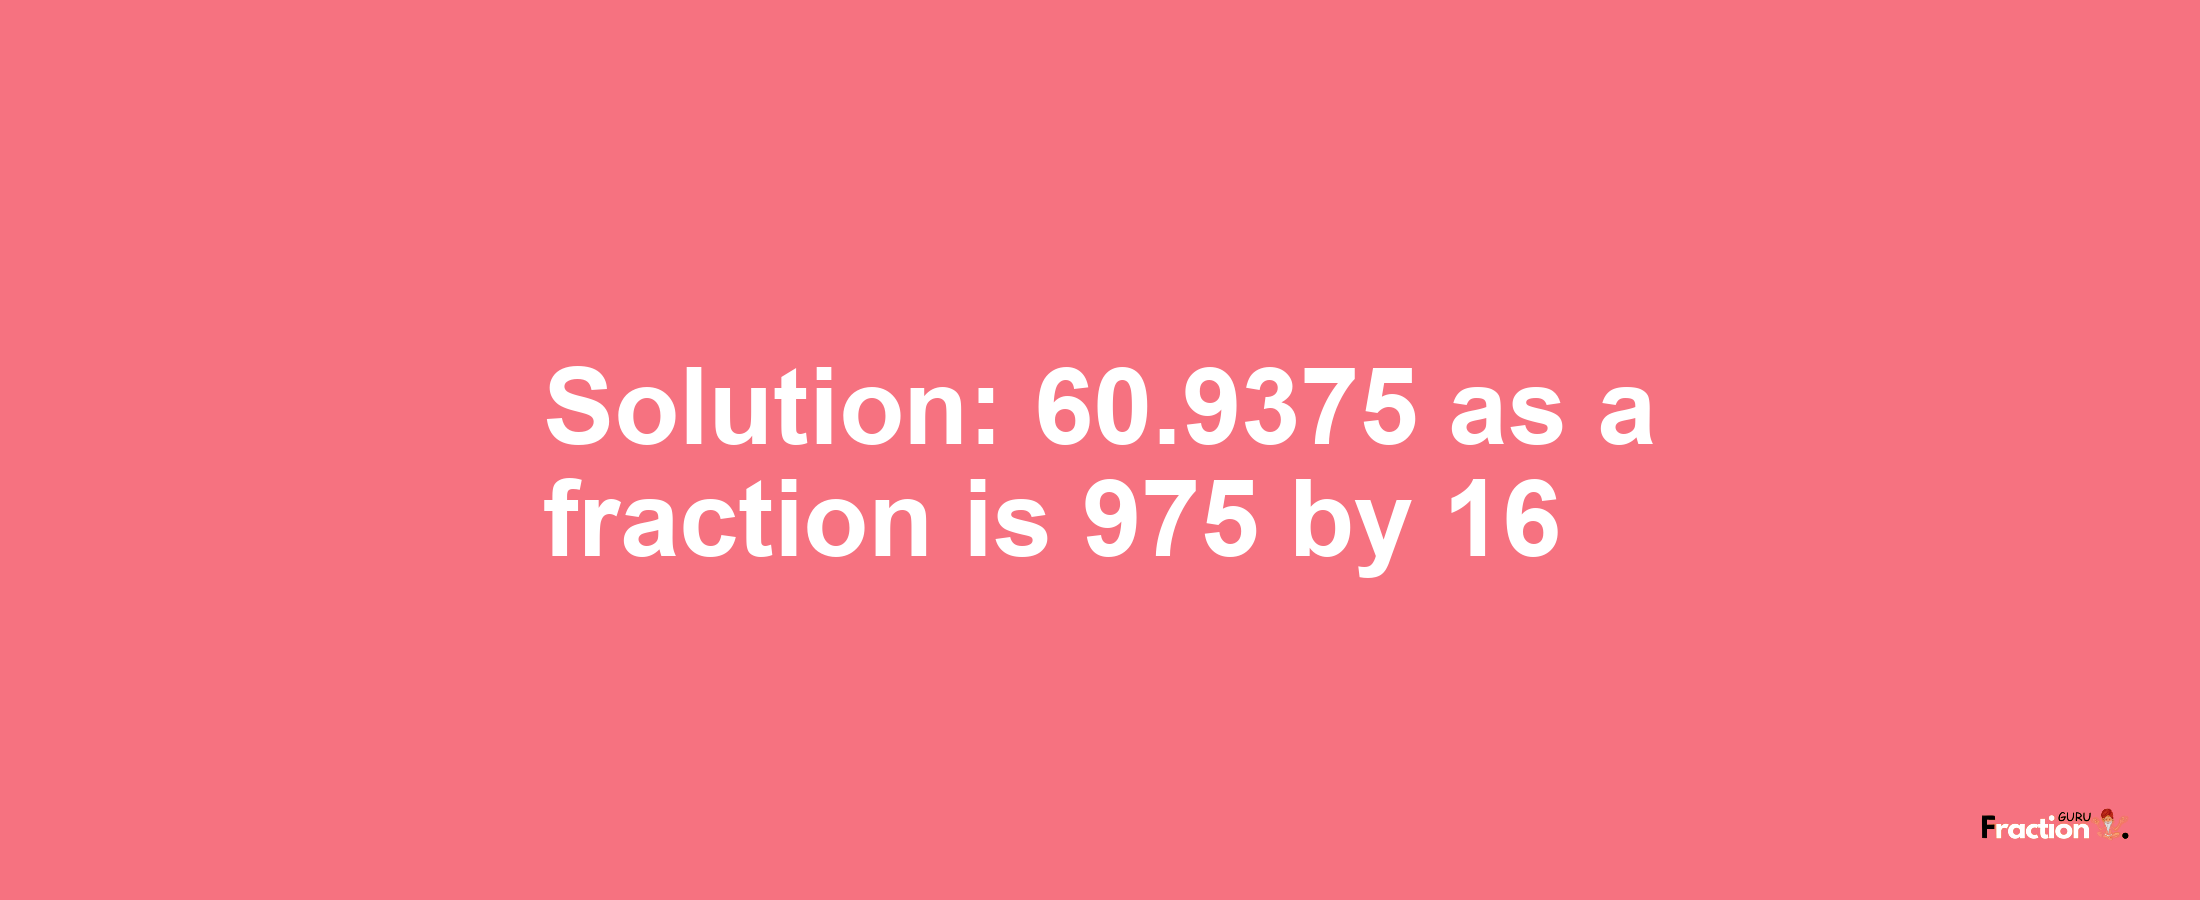 Solution:60.9375 as a fraction is 975/16